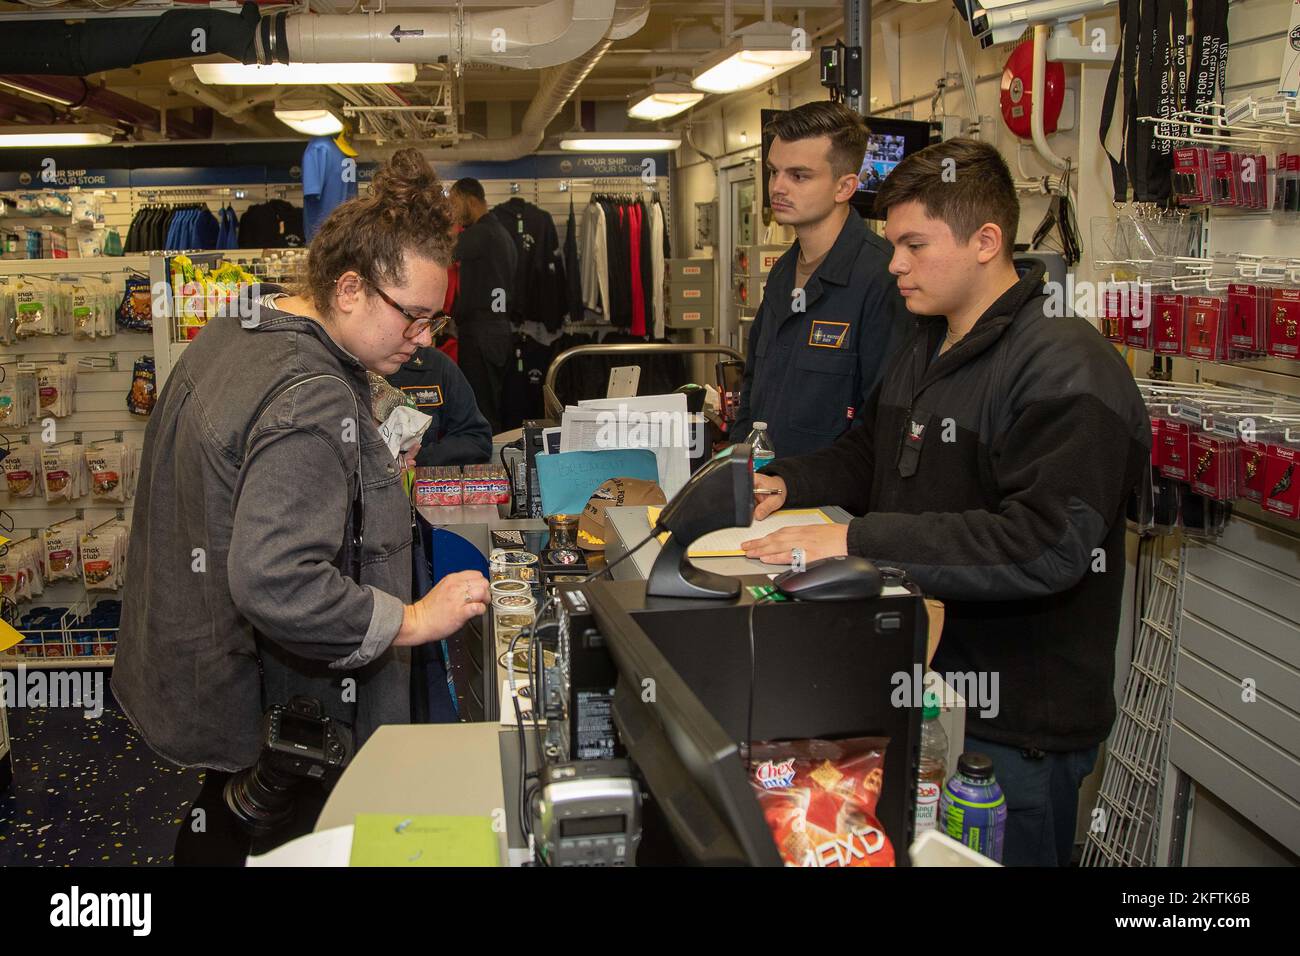 Retail Services Specialist 3rd Class Adriel Garcia-Castaneda, right, from Jonesboro, Georgia, and Retail Services Specialist Seaman Timothy Whiteside, from Valparaiso, Indiana, both assigned to the first-in-class aircraft carrier USS Gerald R. Ford’s (CVN 78) supply department, conduct a sale with Kendall Warner, a photographer with the Virginia-Pilot, during a visit to the ship store, Oct. 7, 2022. The Gerald R. Ford Carrier Strike Group (GRFCSG) is deployed in the Atlantic Ocean, conducting training and operations alongside NATO Allies and partners to enhance integration for future operation Stock Photo